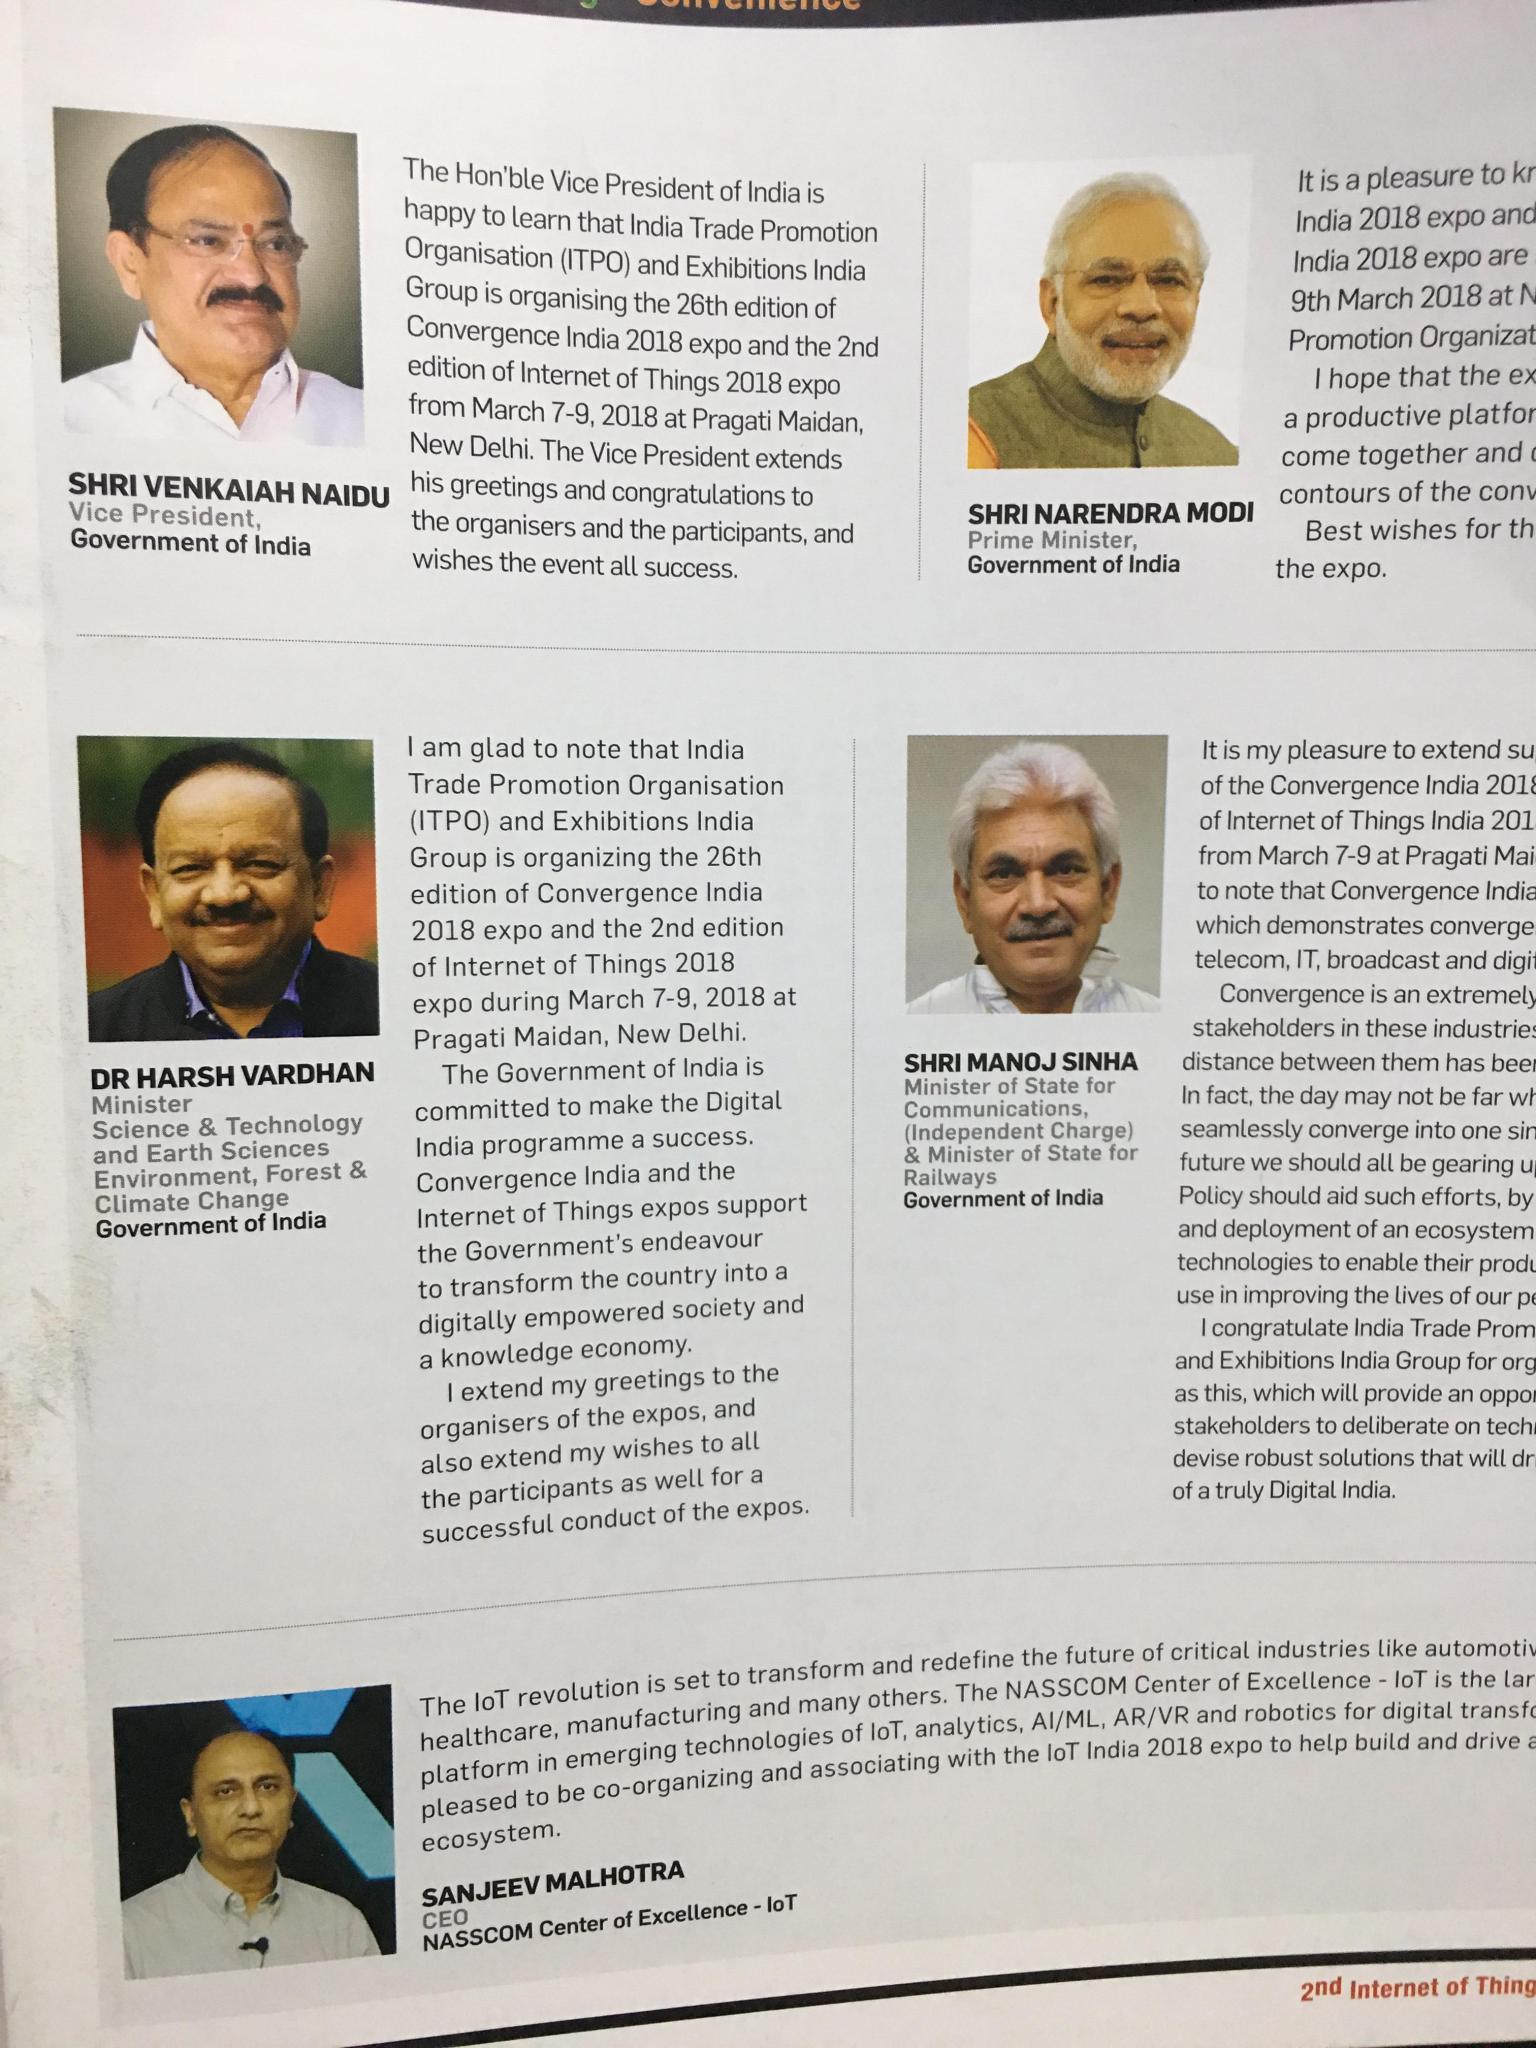 About Famous People in IoT Magazine